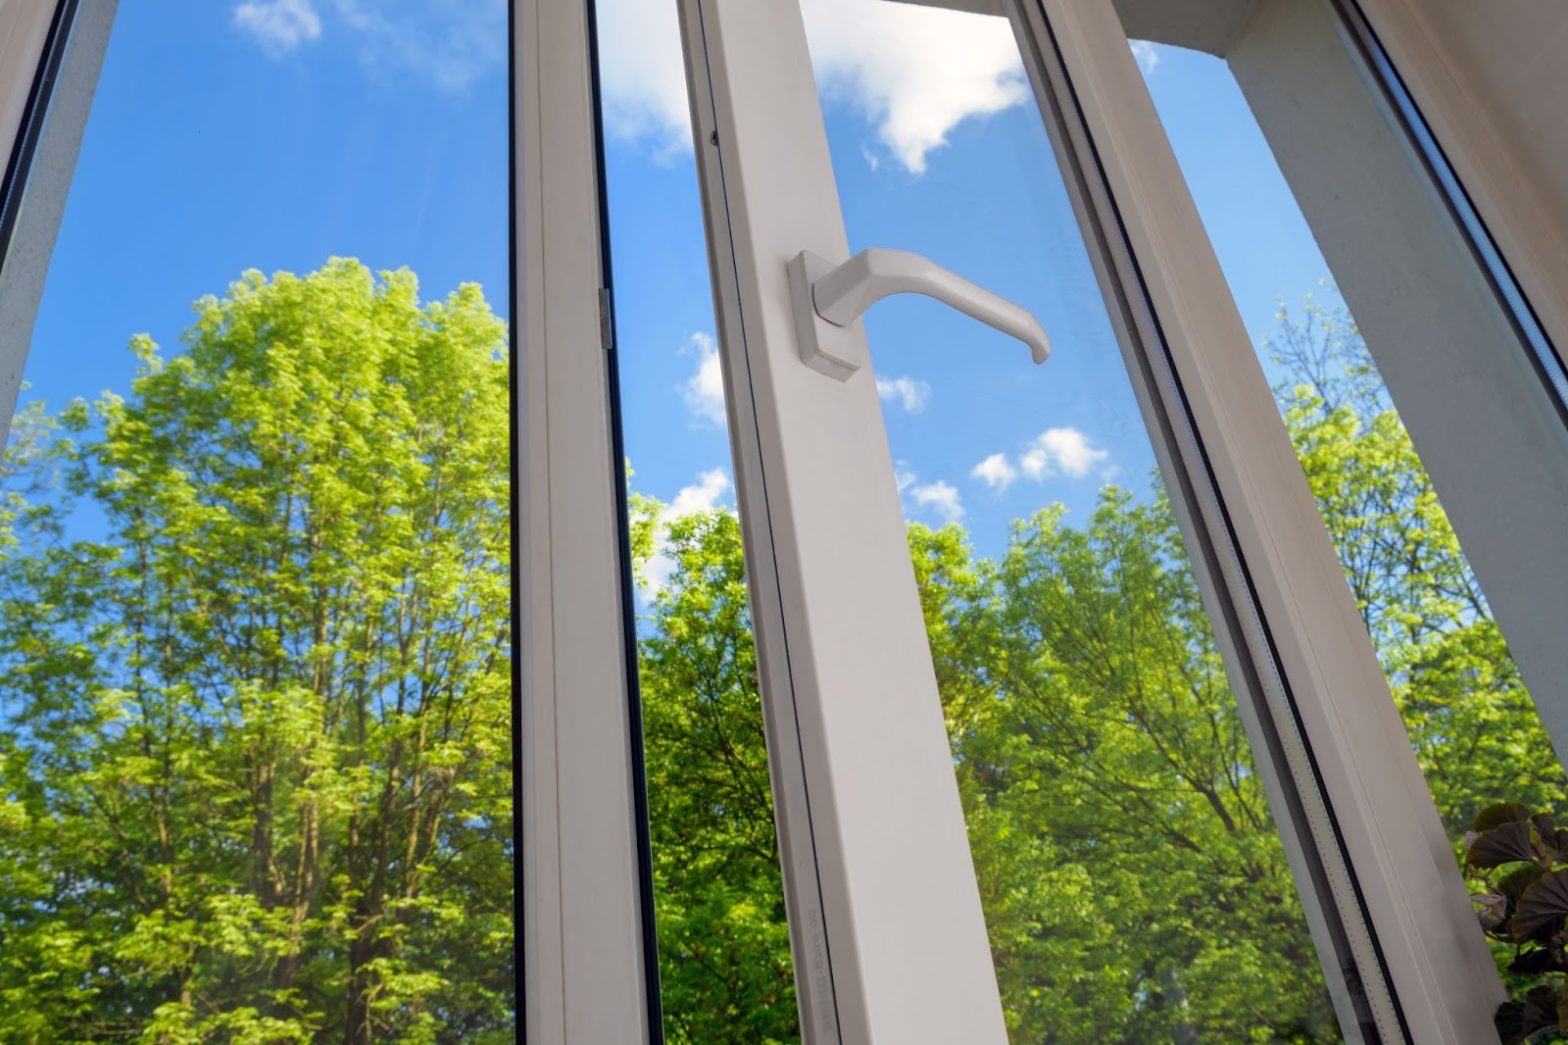 Laminated Glass vs. Tempered Glass: What’s the Difference?